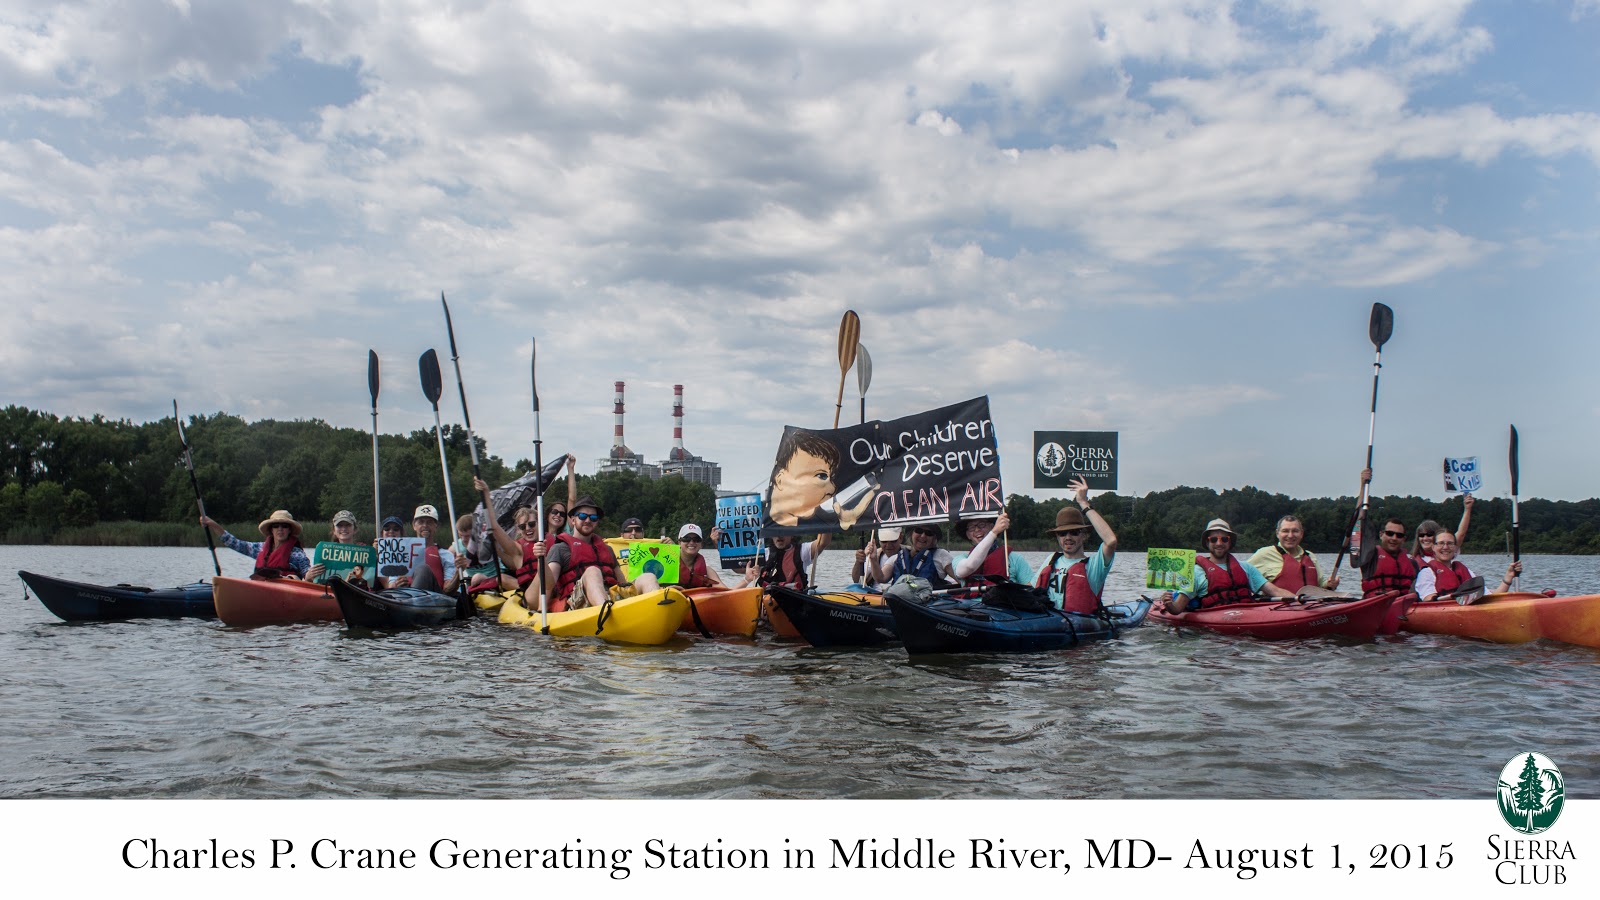 Activists sit in kayaks and raise their oars